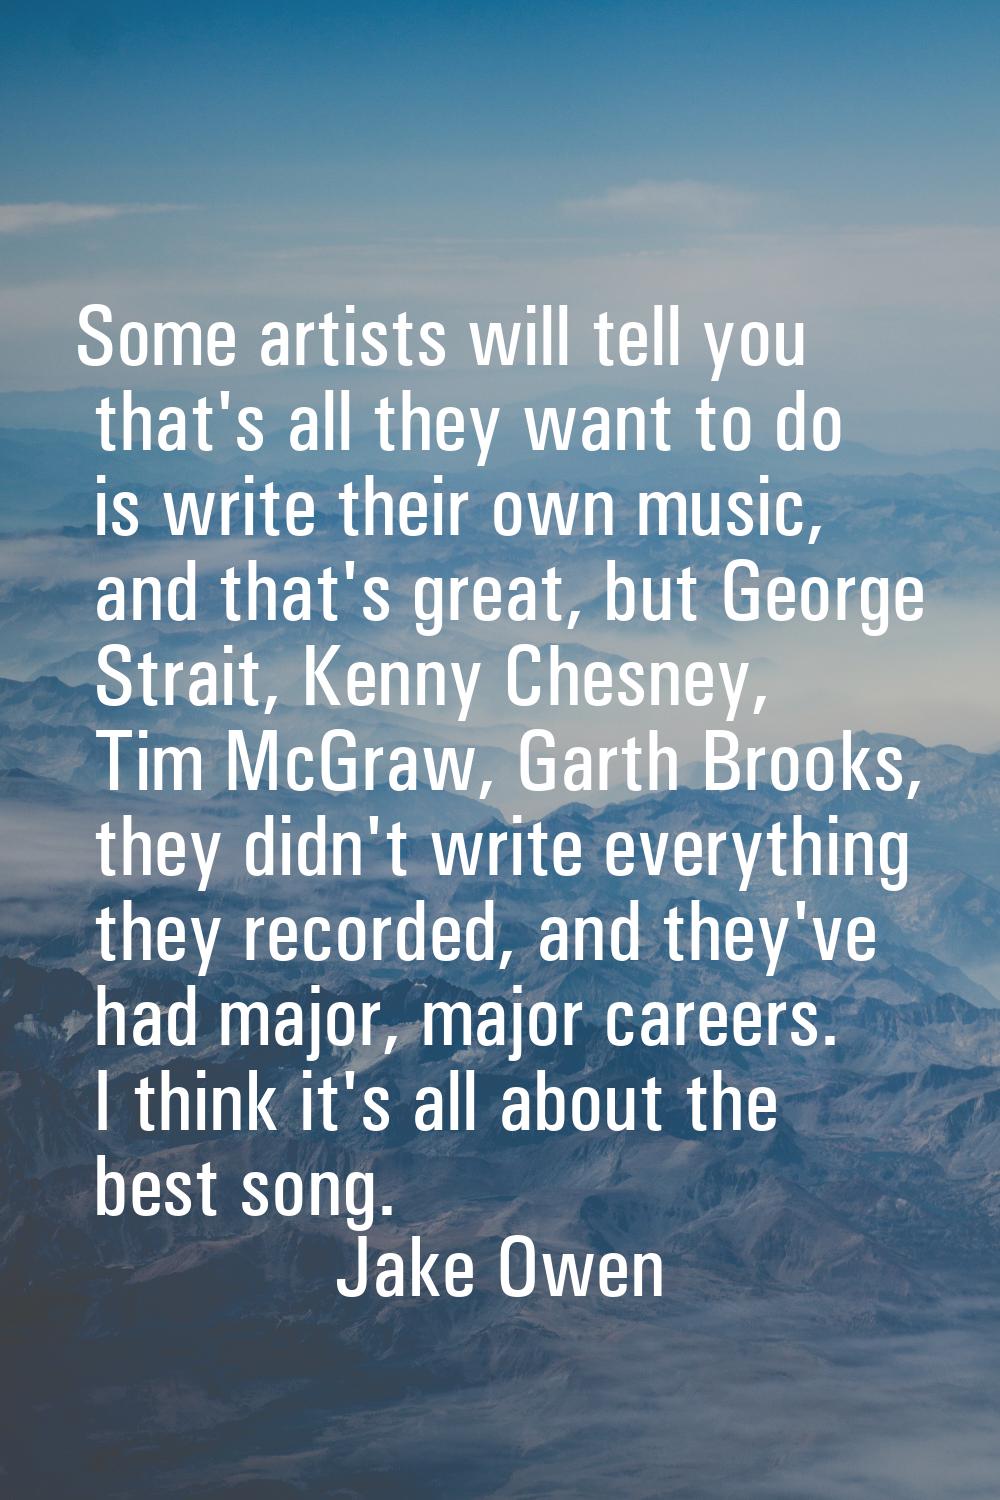 Some artists will tell you that's all they want to do is write their own music, and that's great, b